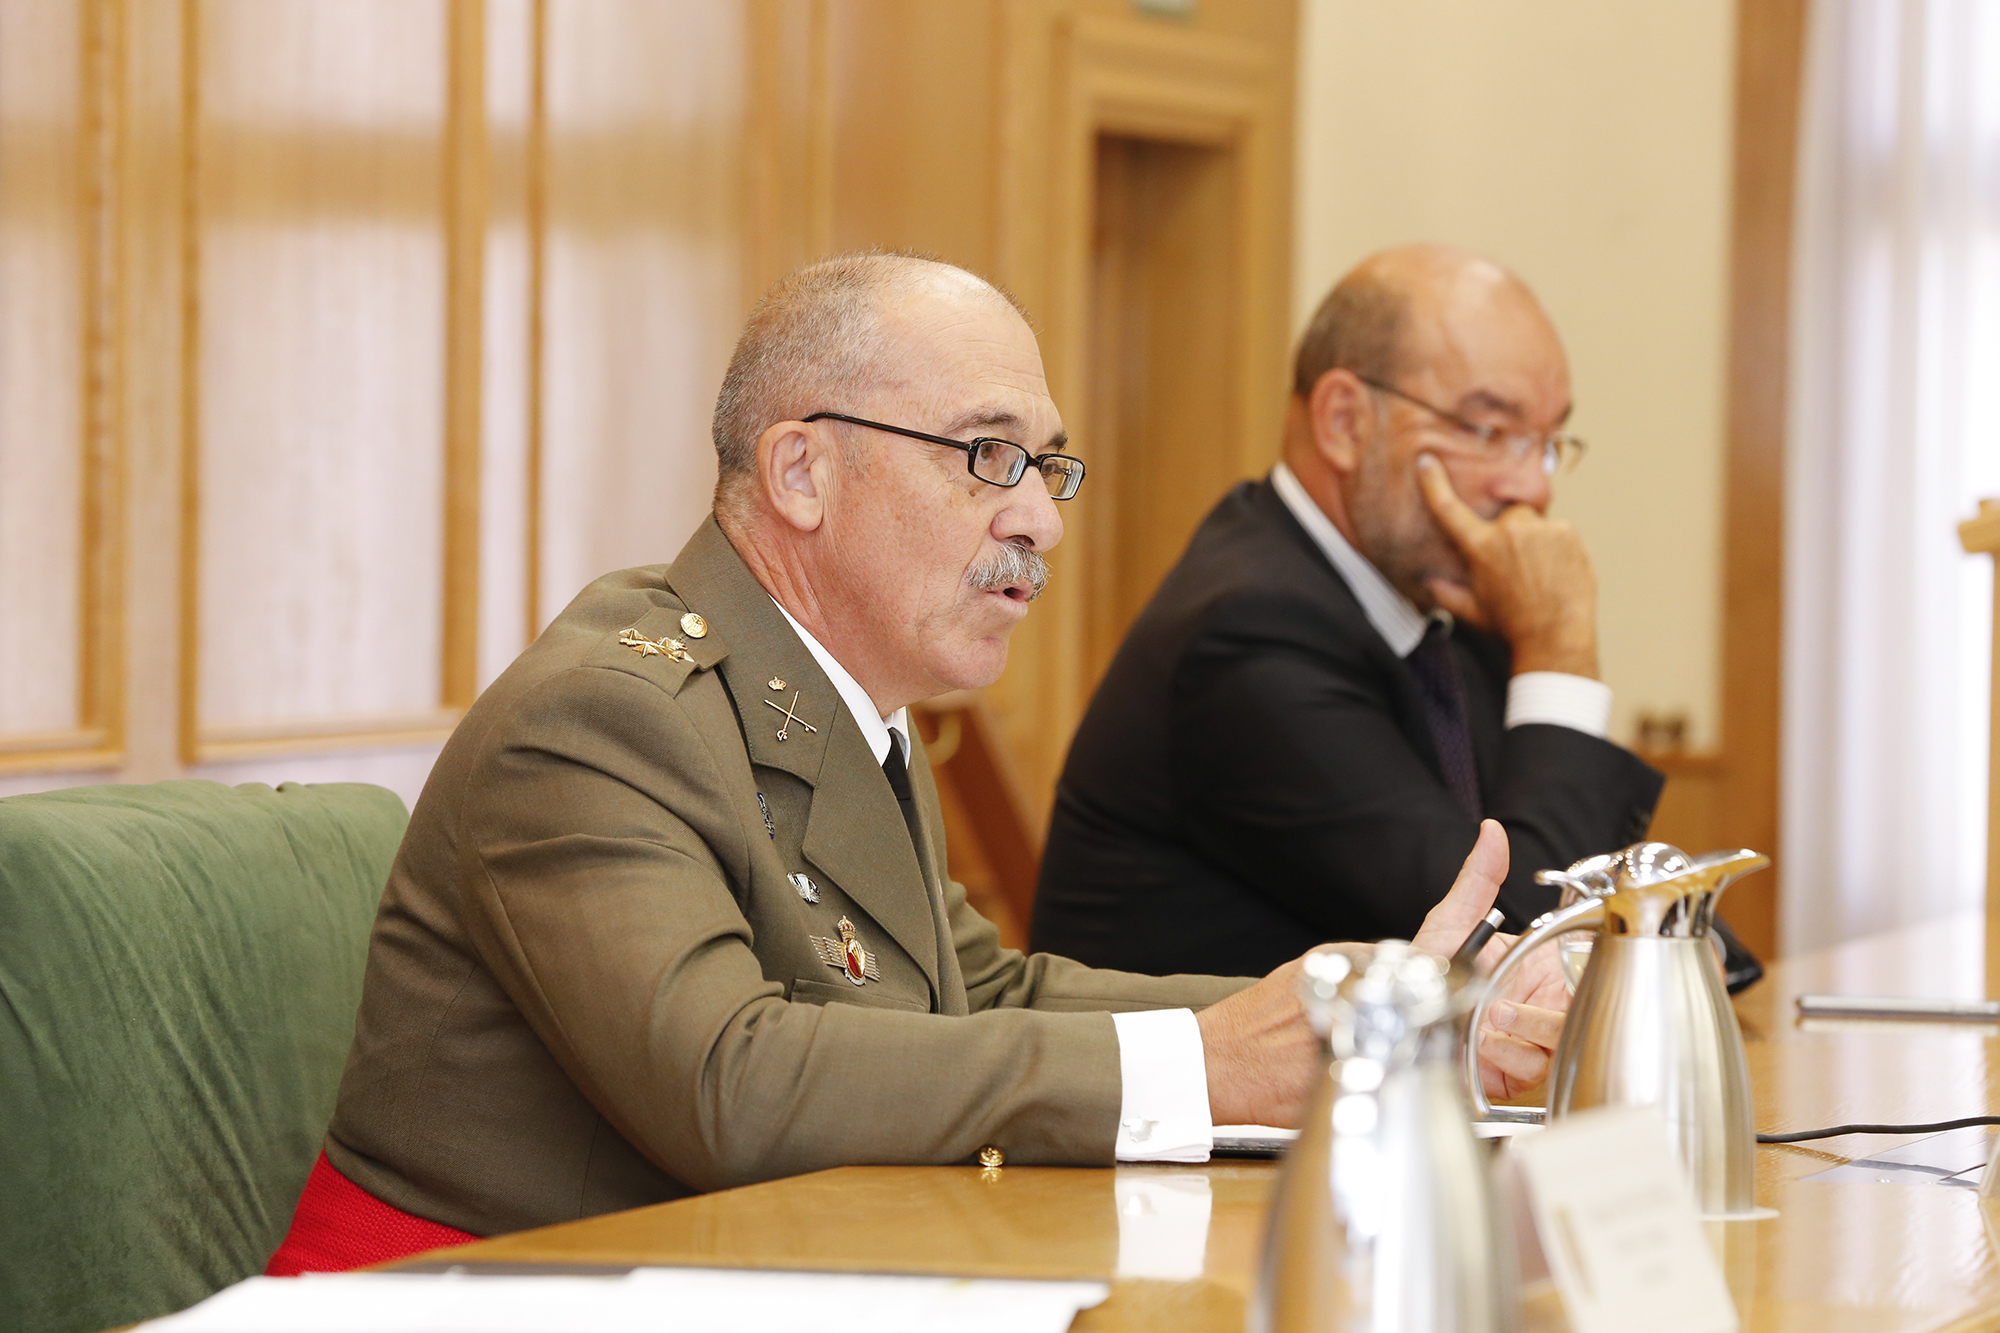 The Spanish Chief of Defence Staff closing the ceremony